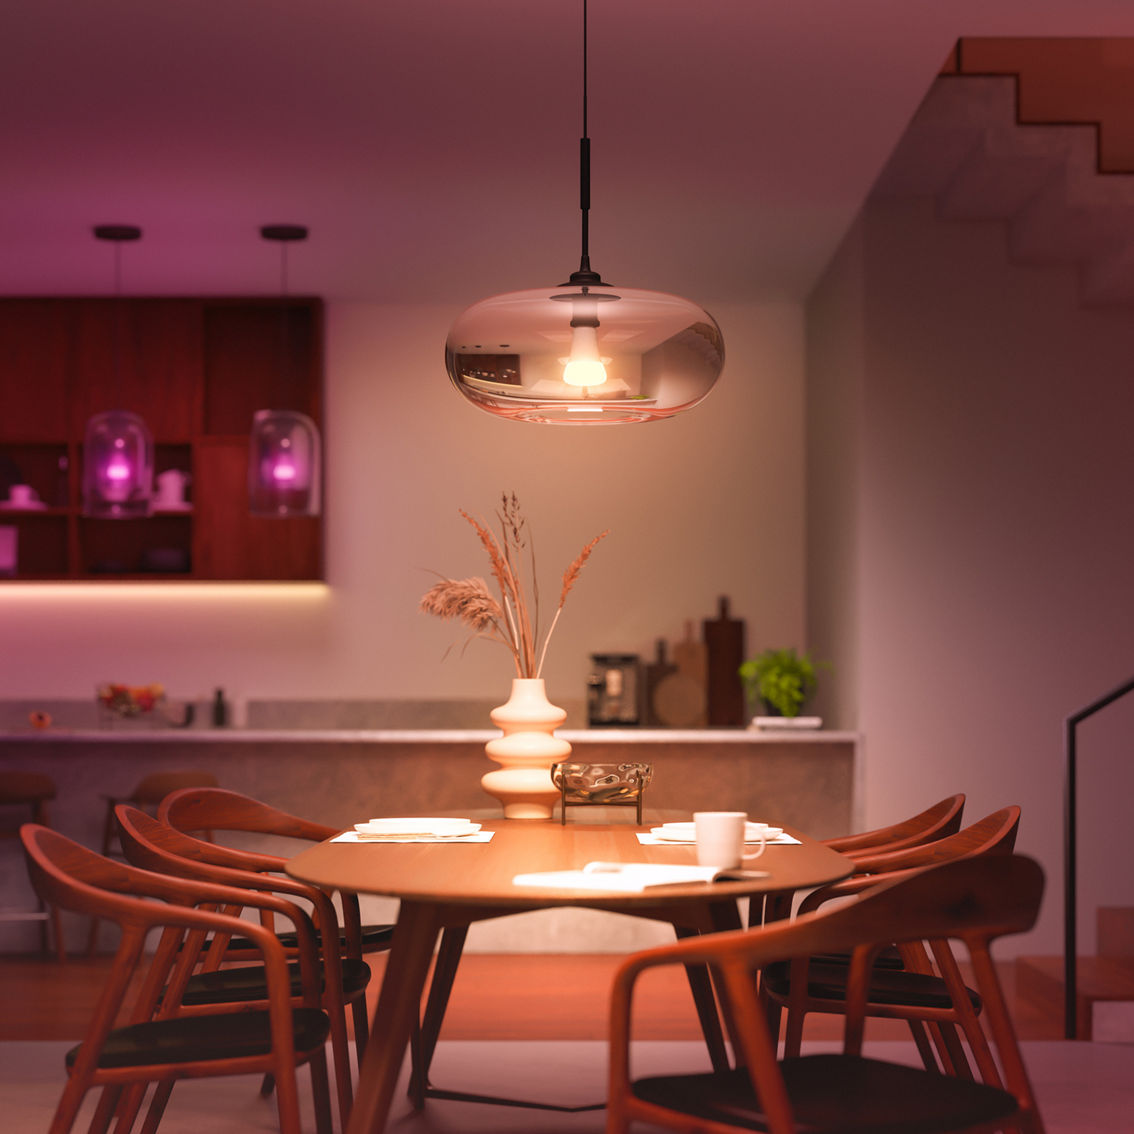 Philips Hue 100W A21 LED Smart Bulb - White and Color Ambiance - Image 4 of 7